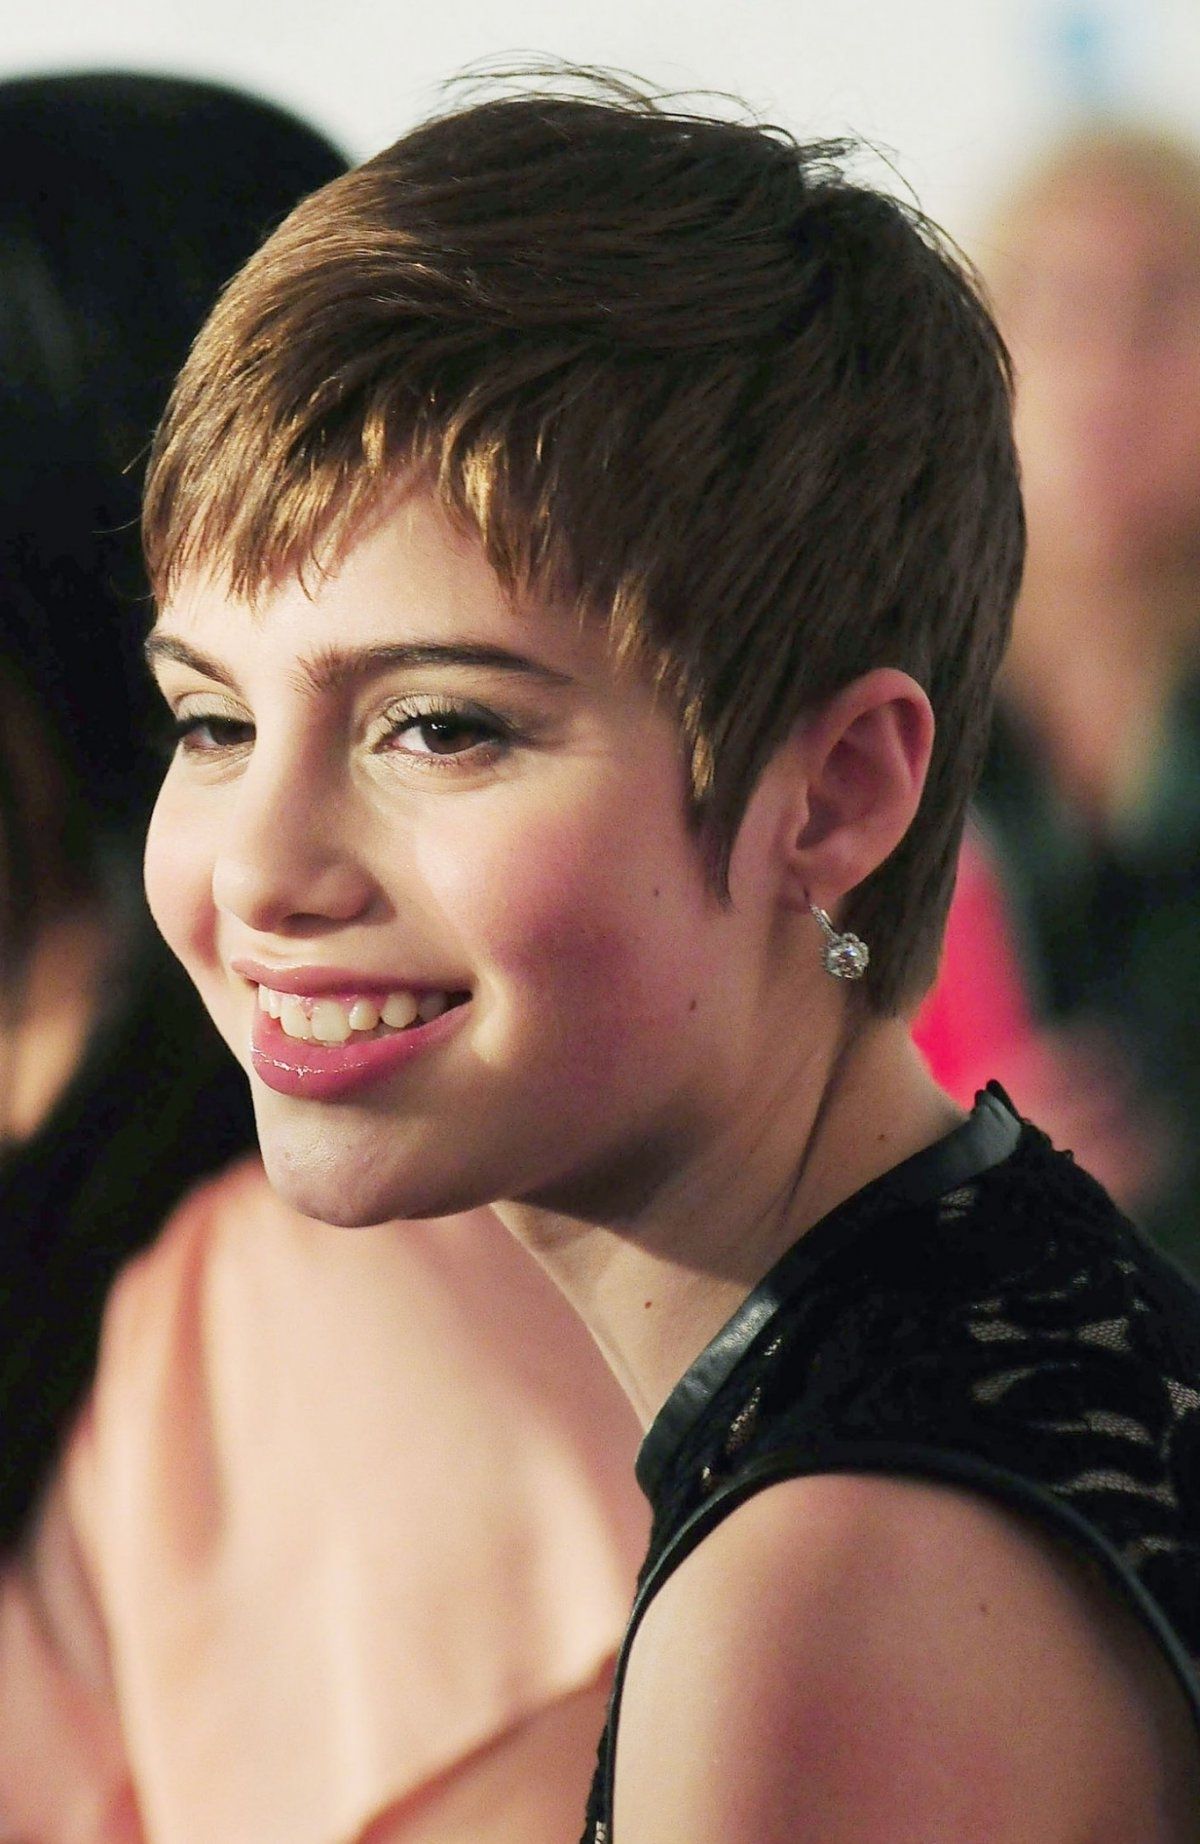 Sami Gayle – Love Her Hairstyle This Picture Shows The Side And Throughout Latest Sexy Pixie Hairstyles (View 11 of 15)